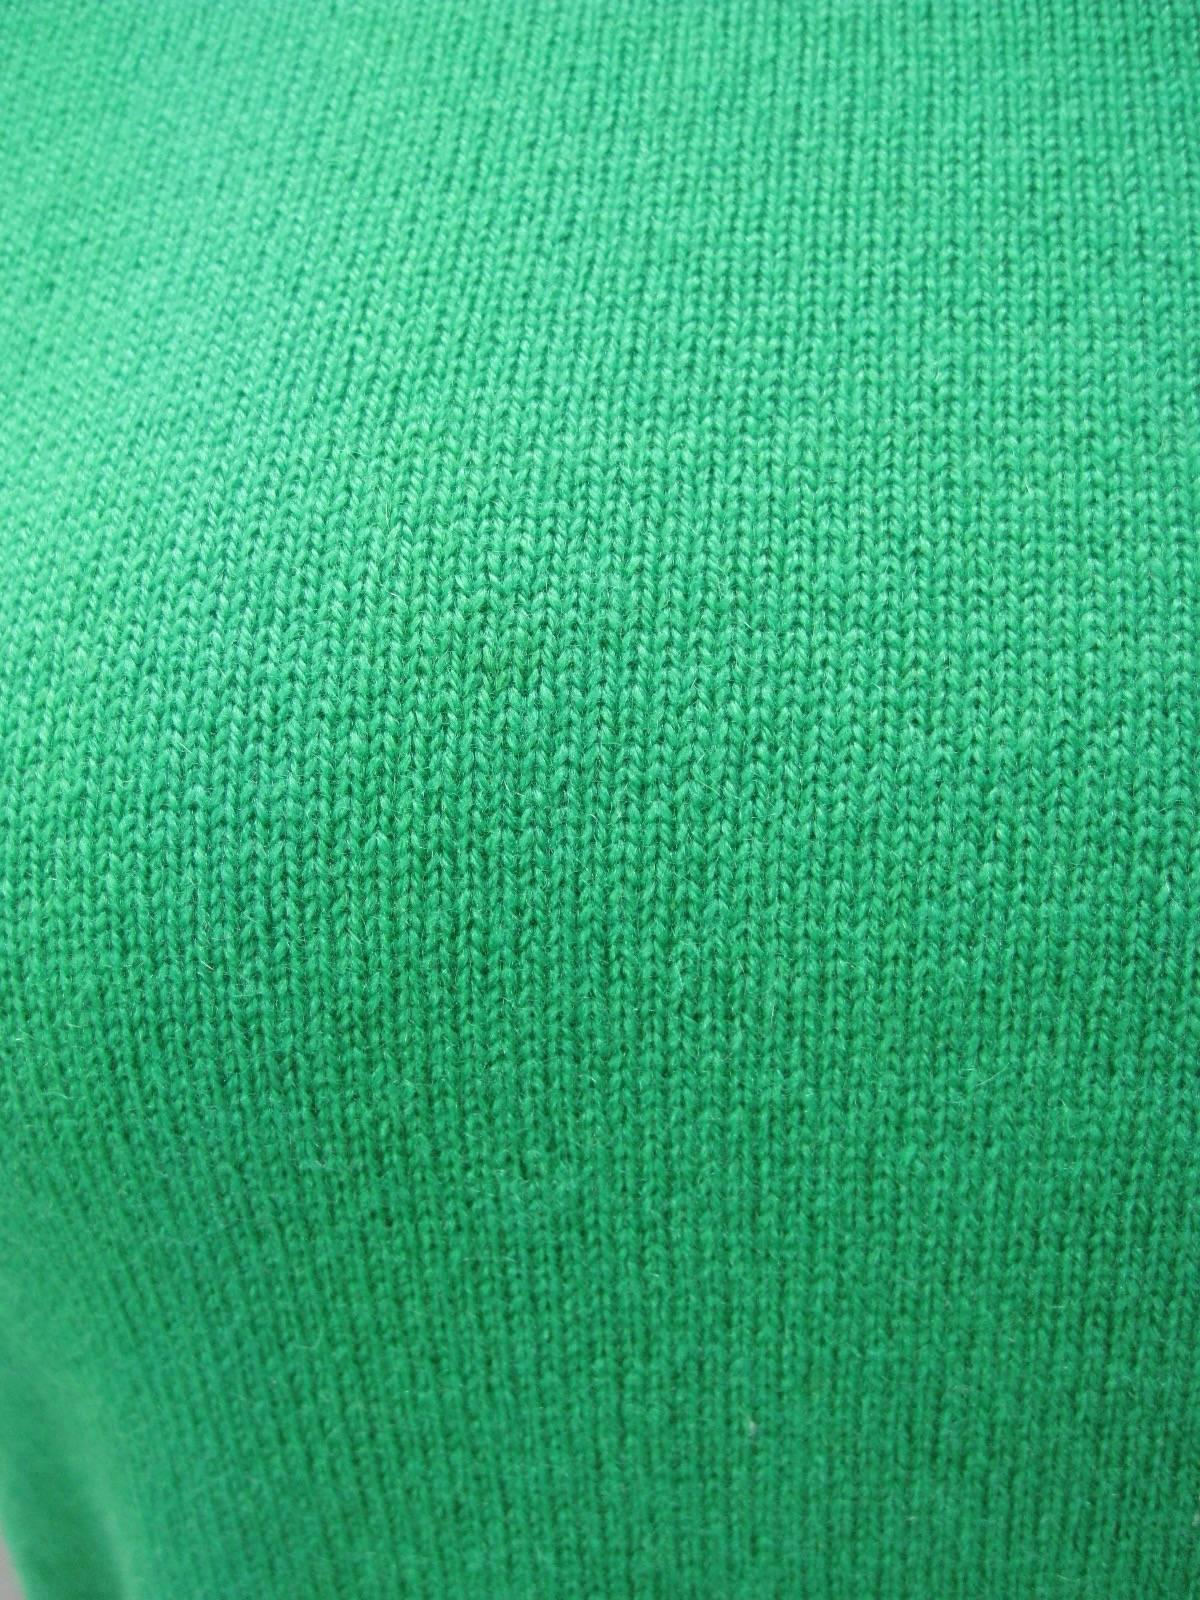 Women's Vintage 1980s Chanel Cropped Green Short Sleeve Sweater